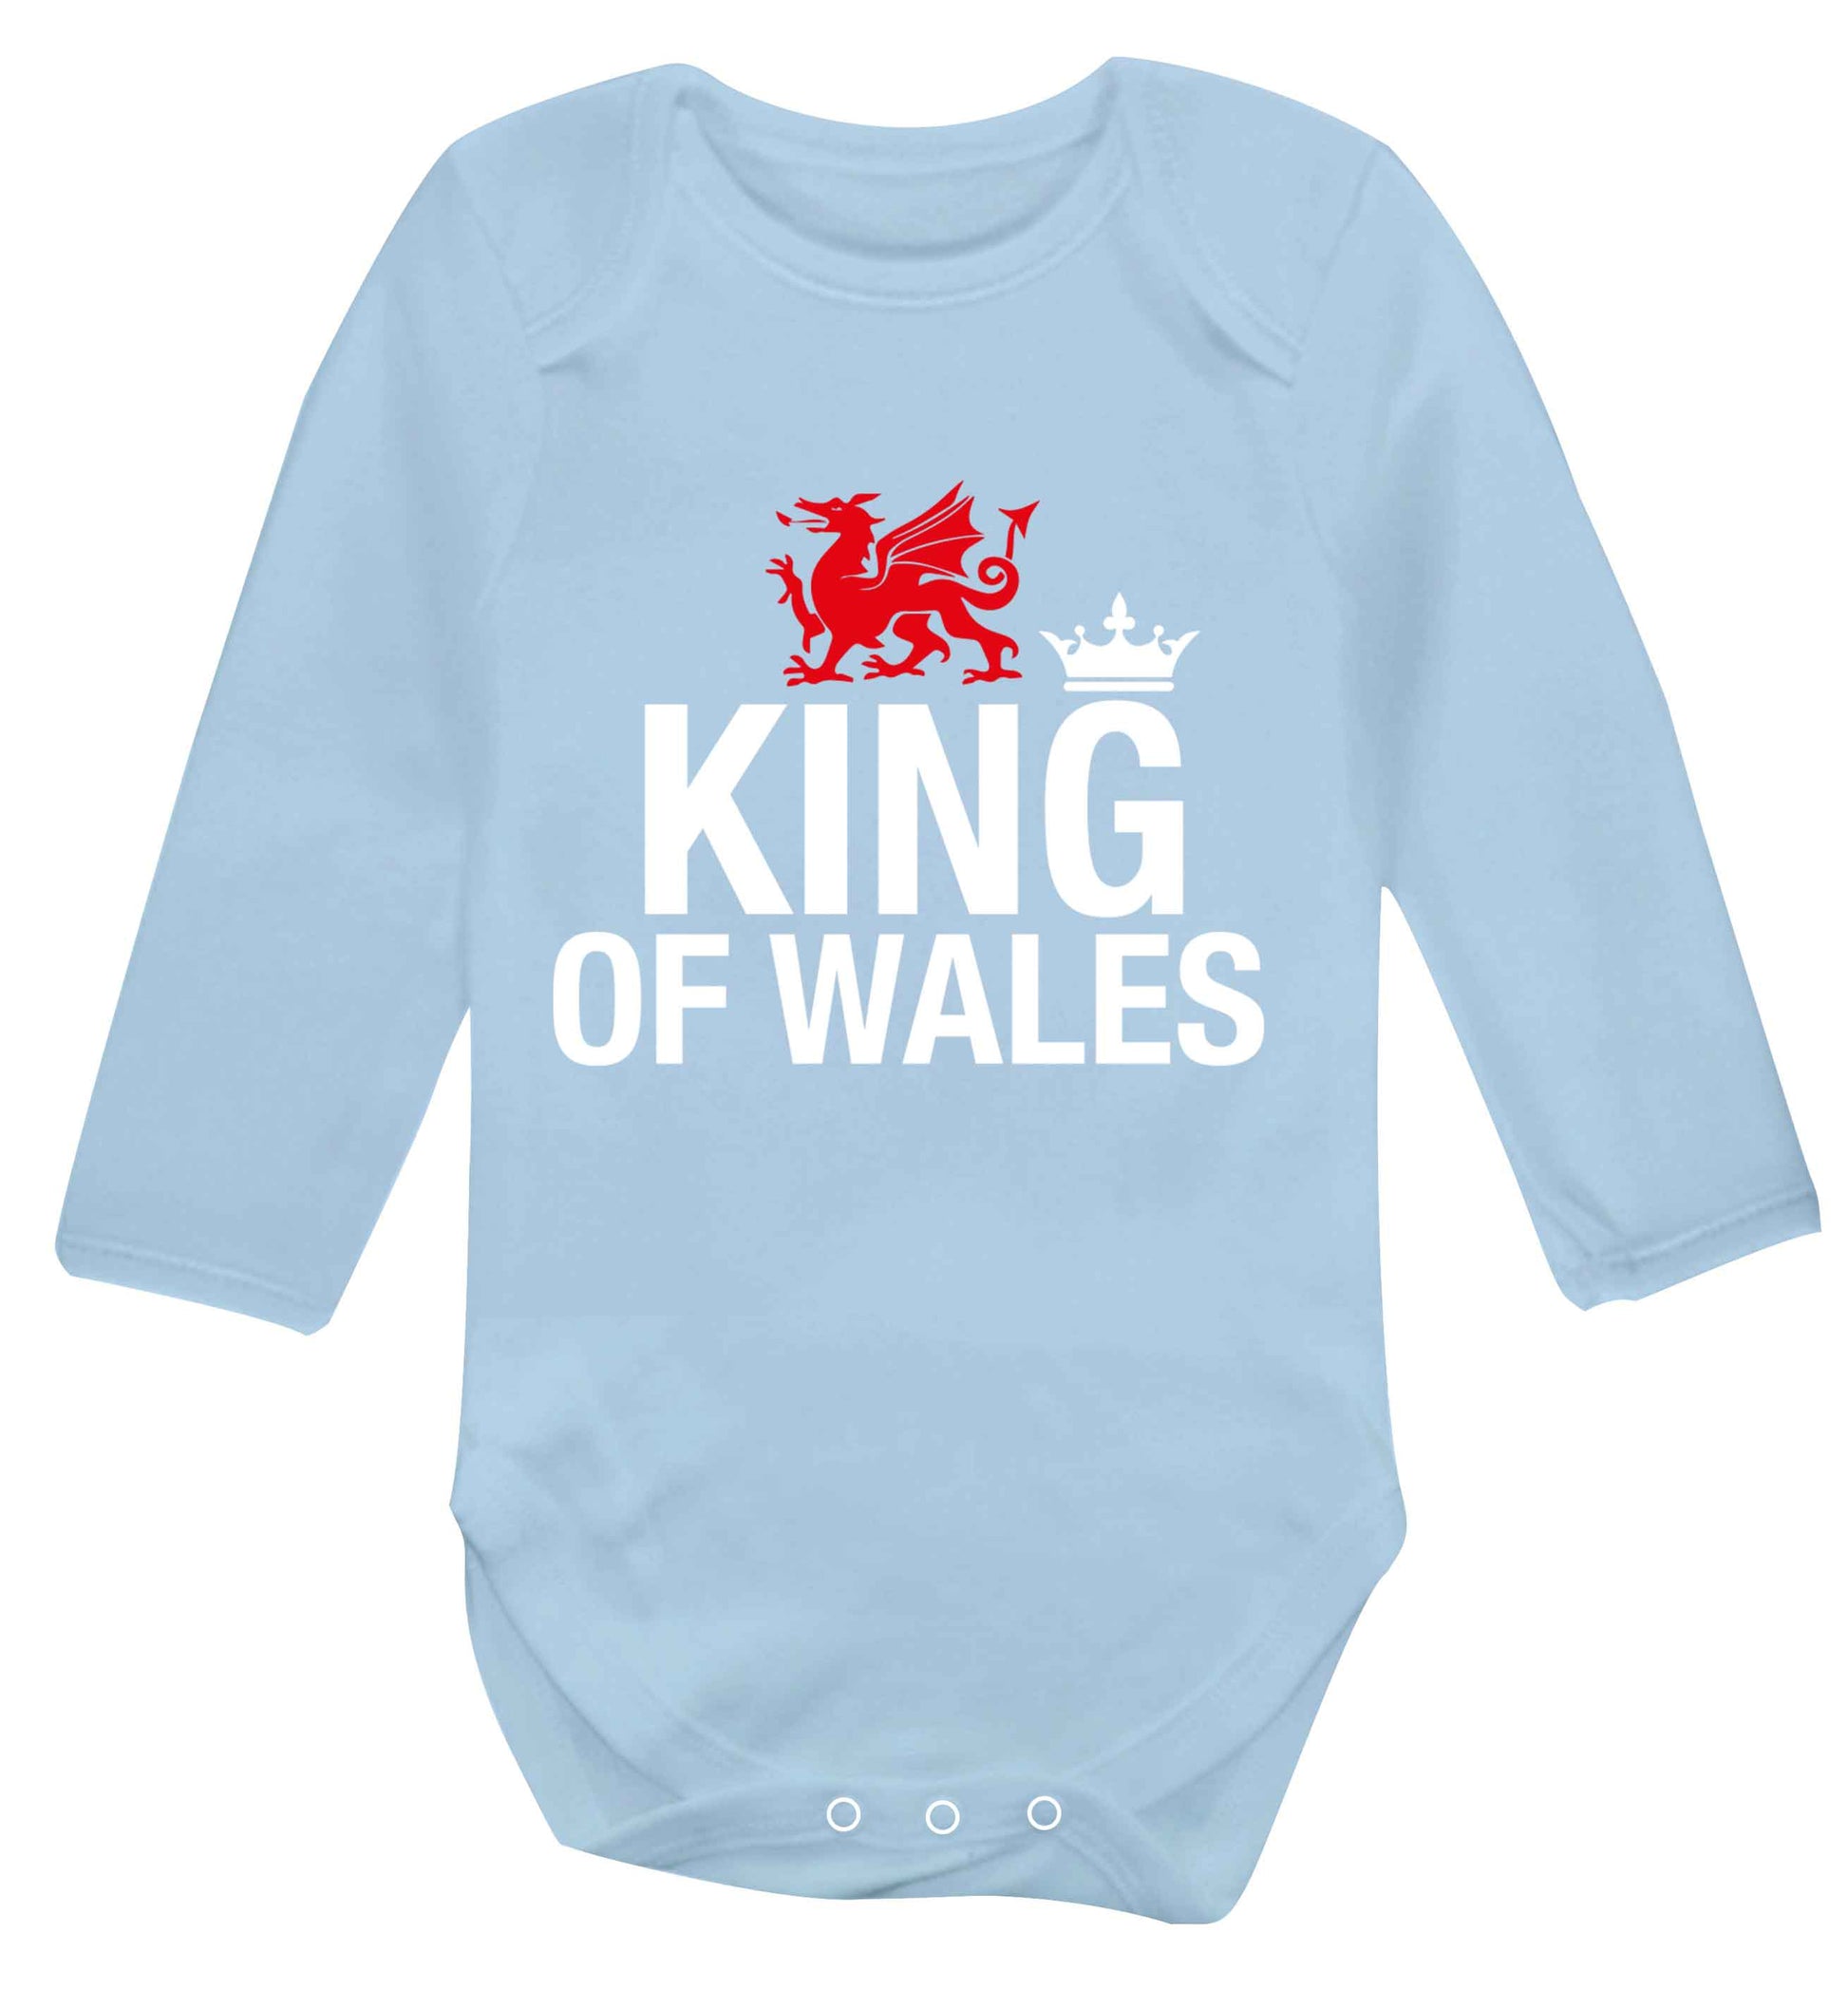 King of Wales Baby Vest long sleeved pale blue 6-12 months